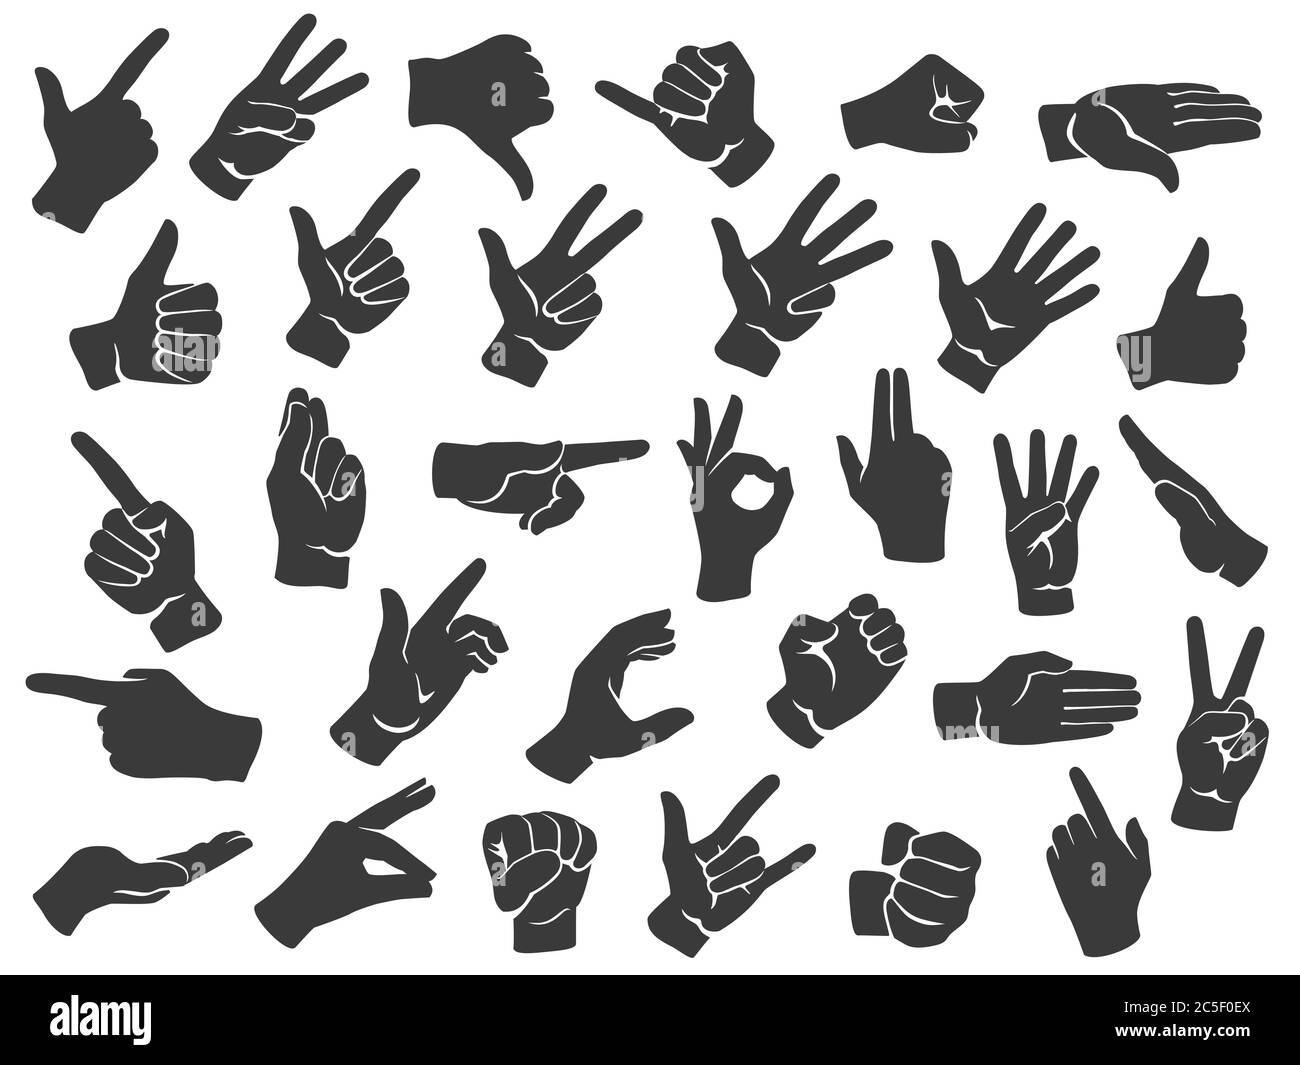 Hand gesture silhouette icons. Man hands gestures, pointing finger and thumbs up like icon stencil vector set Stock Vector